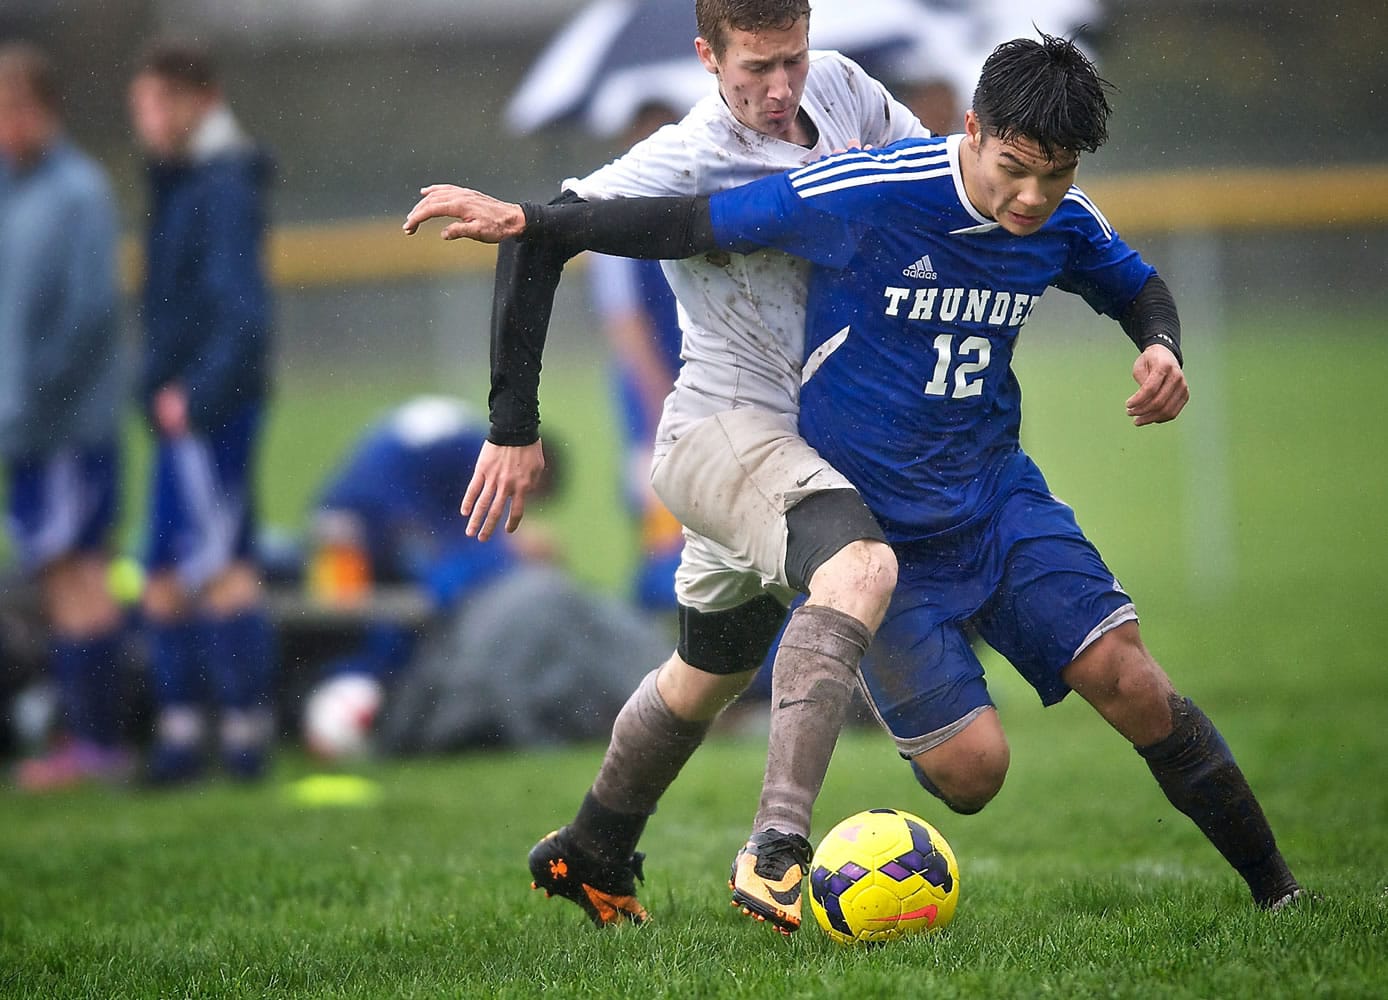 Mountain View's Isaac Strever (12), battling against Heritage High's Grant Thiriot in Friday's match, has six goals and two assists six games into the season.